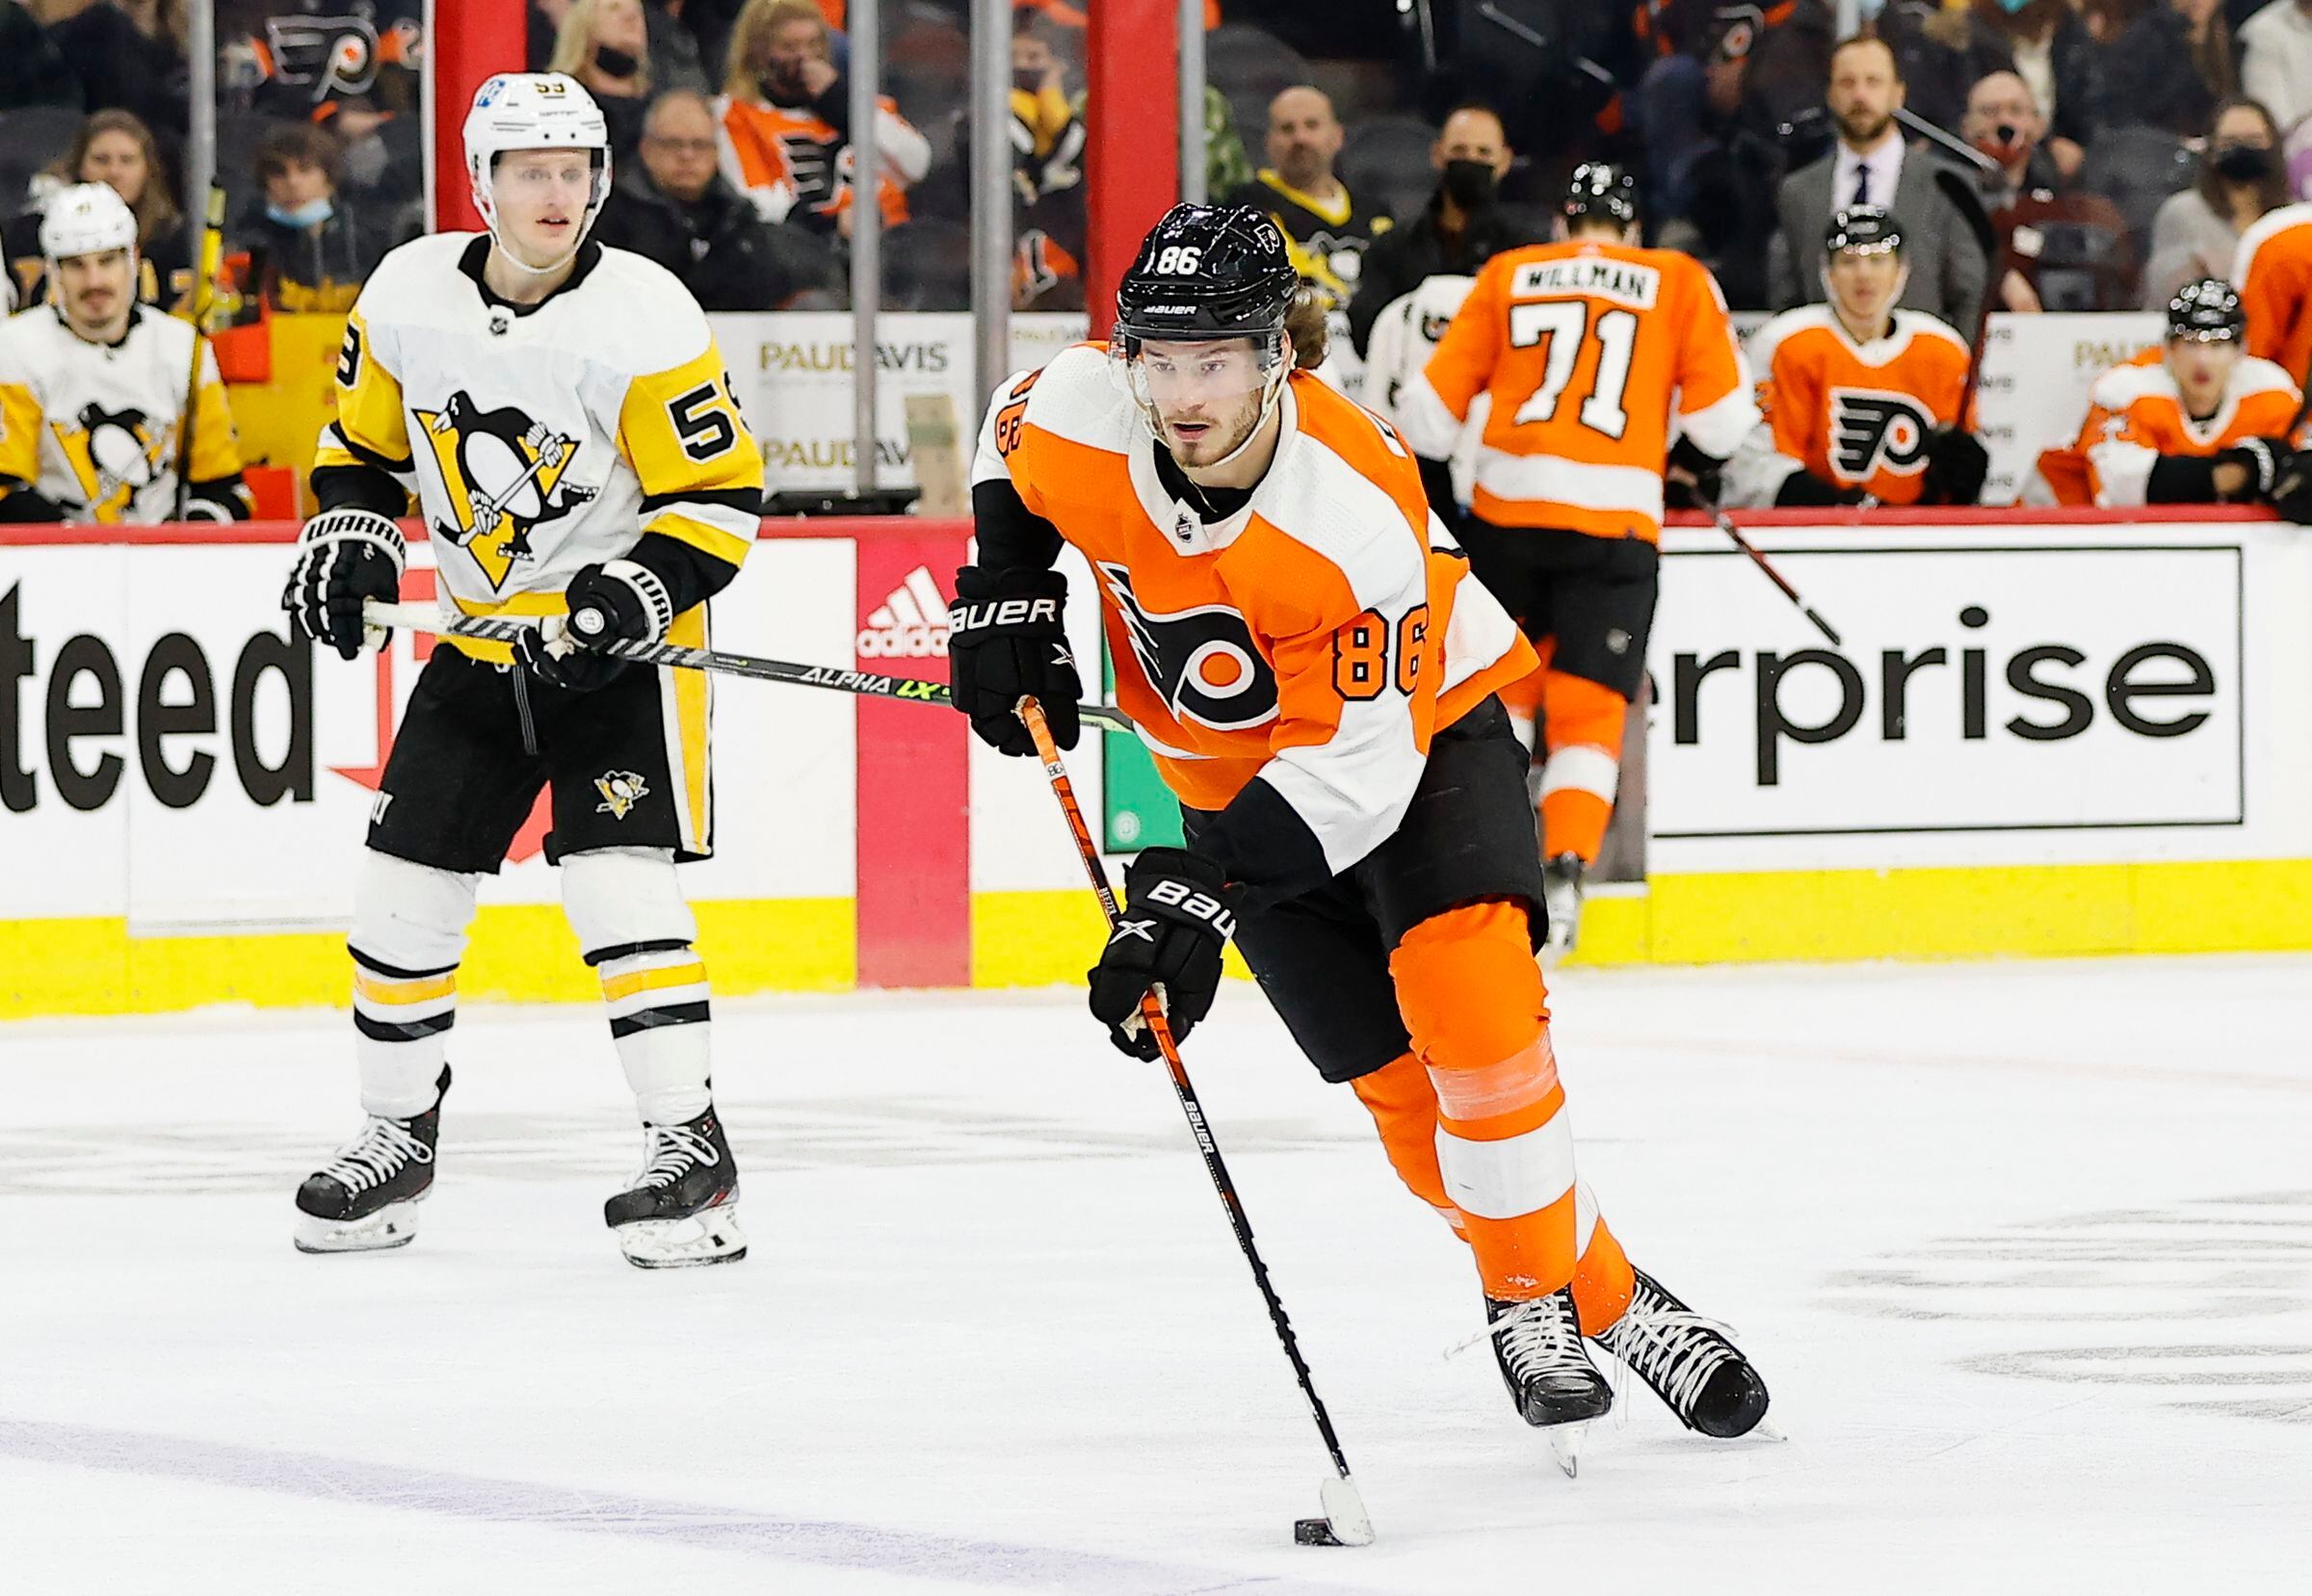 Return of Couturier, Atkinson should improve Flyers' outlook